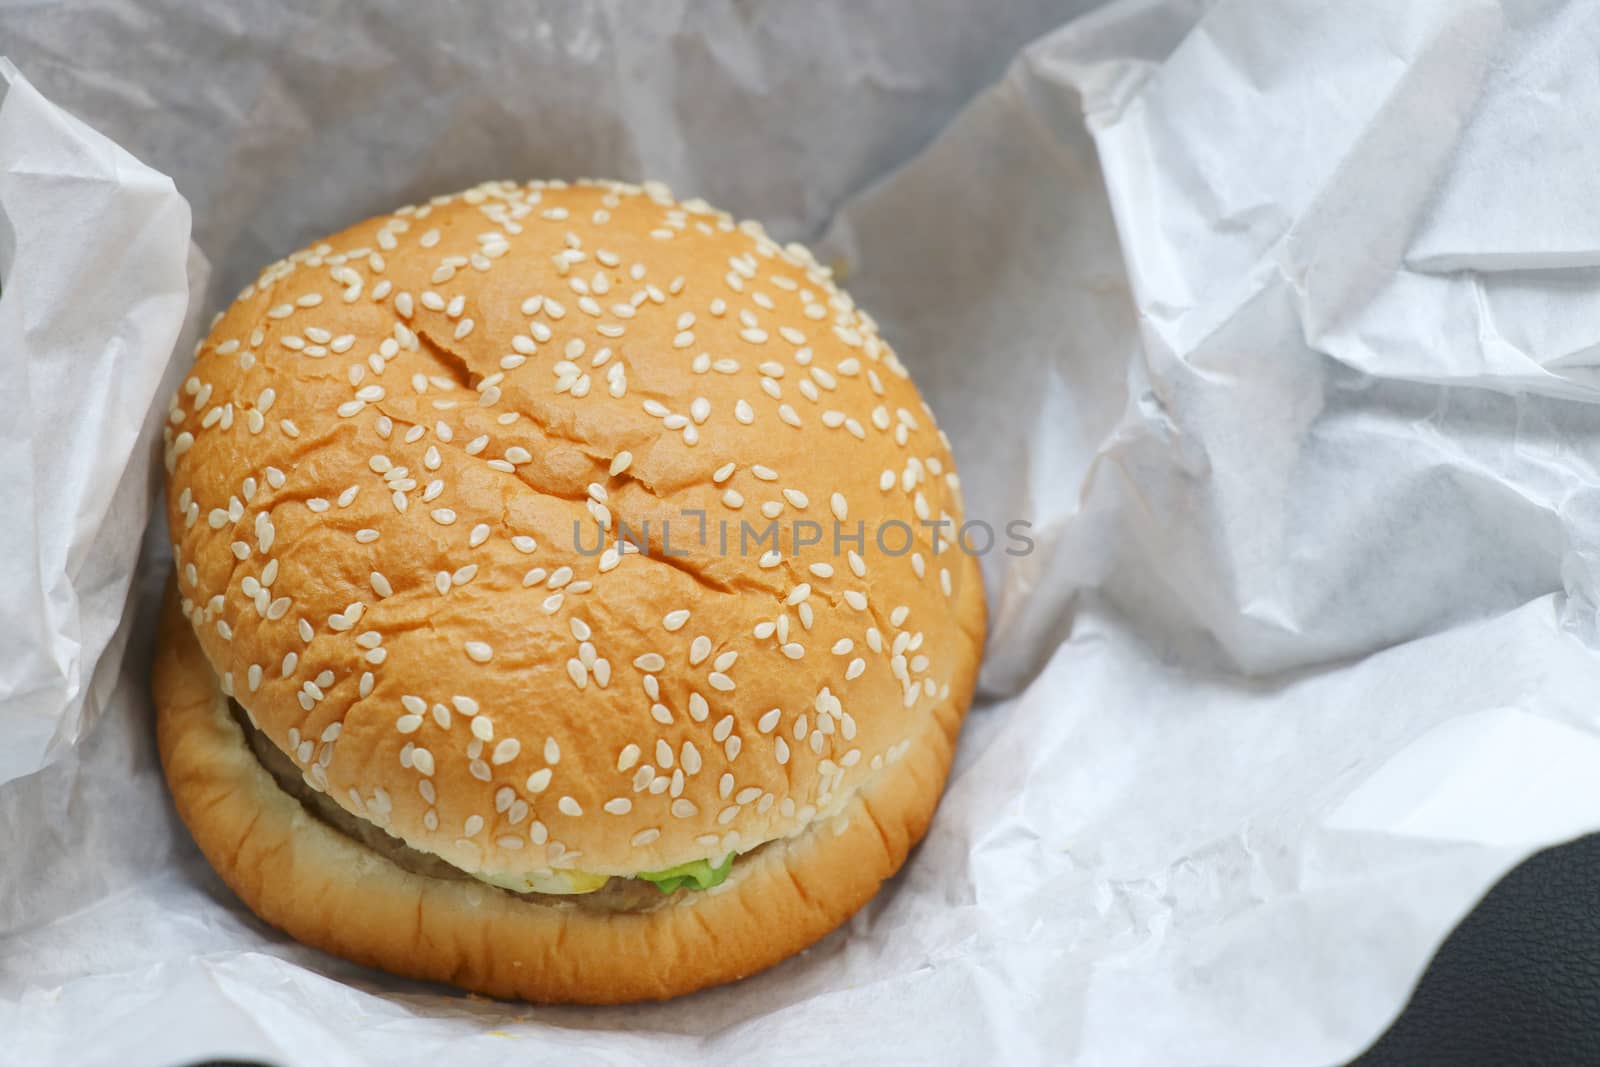 The hamburger is placed on white paper. Hamburger with white sesame sprinkled on top.